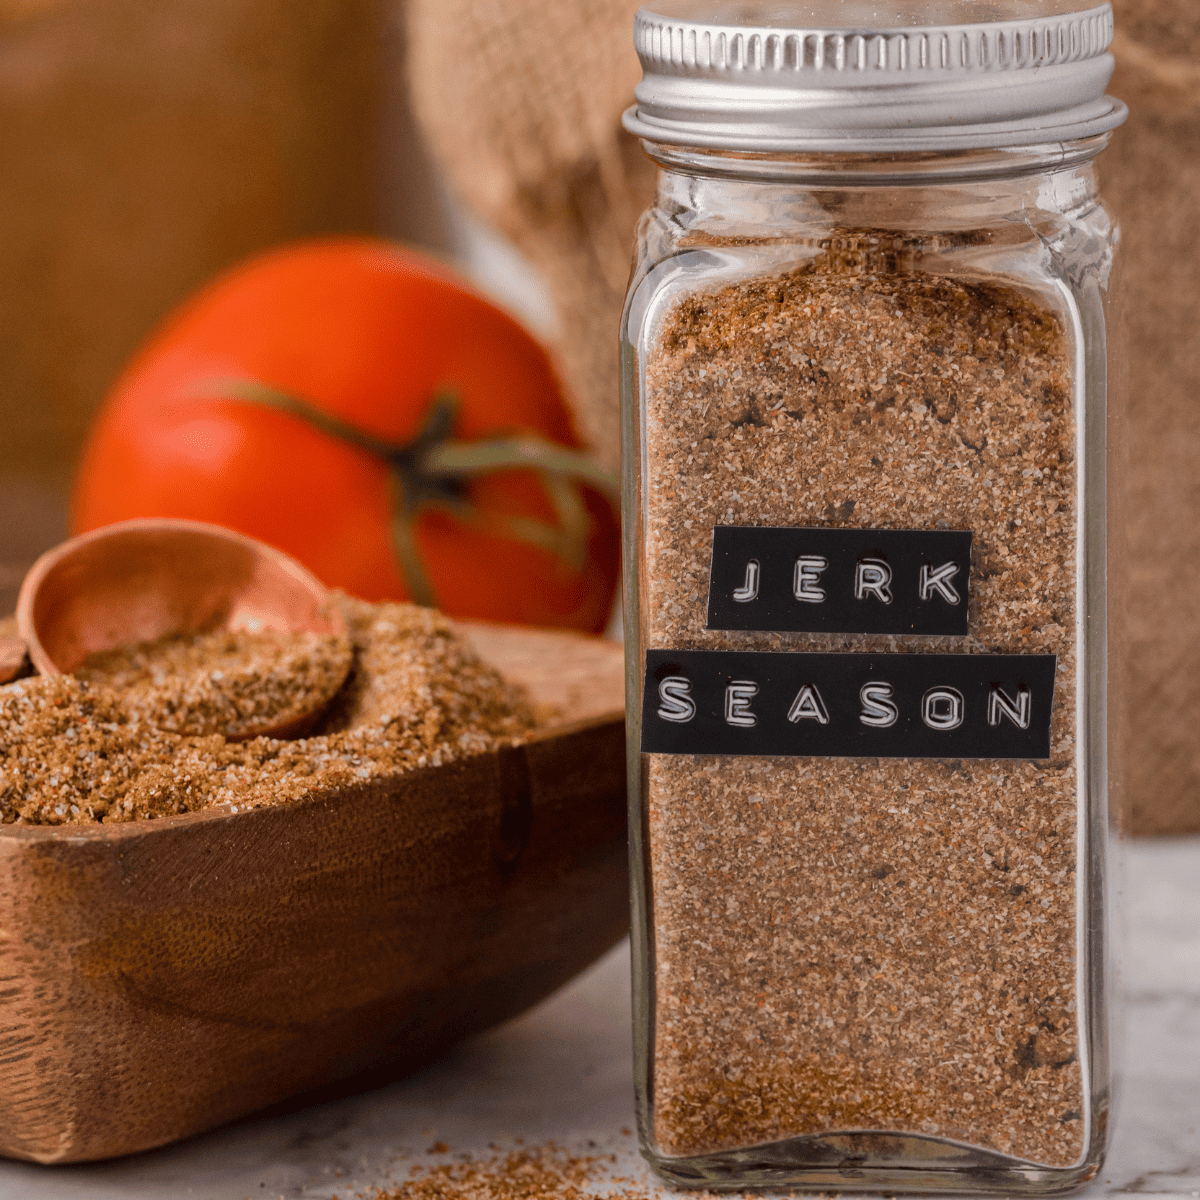 Use fresh spices for your jerk seasoning